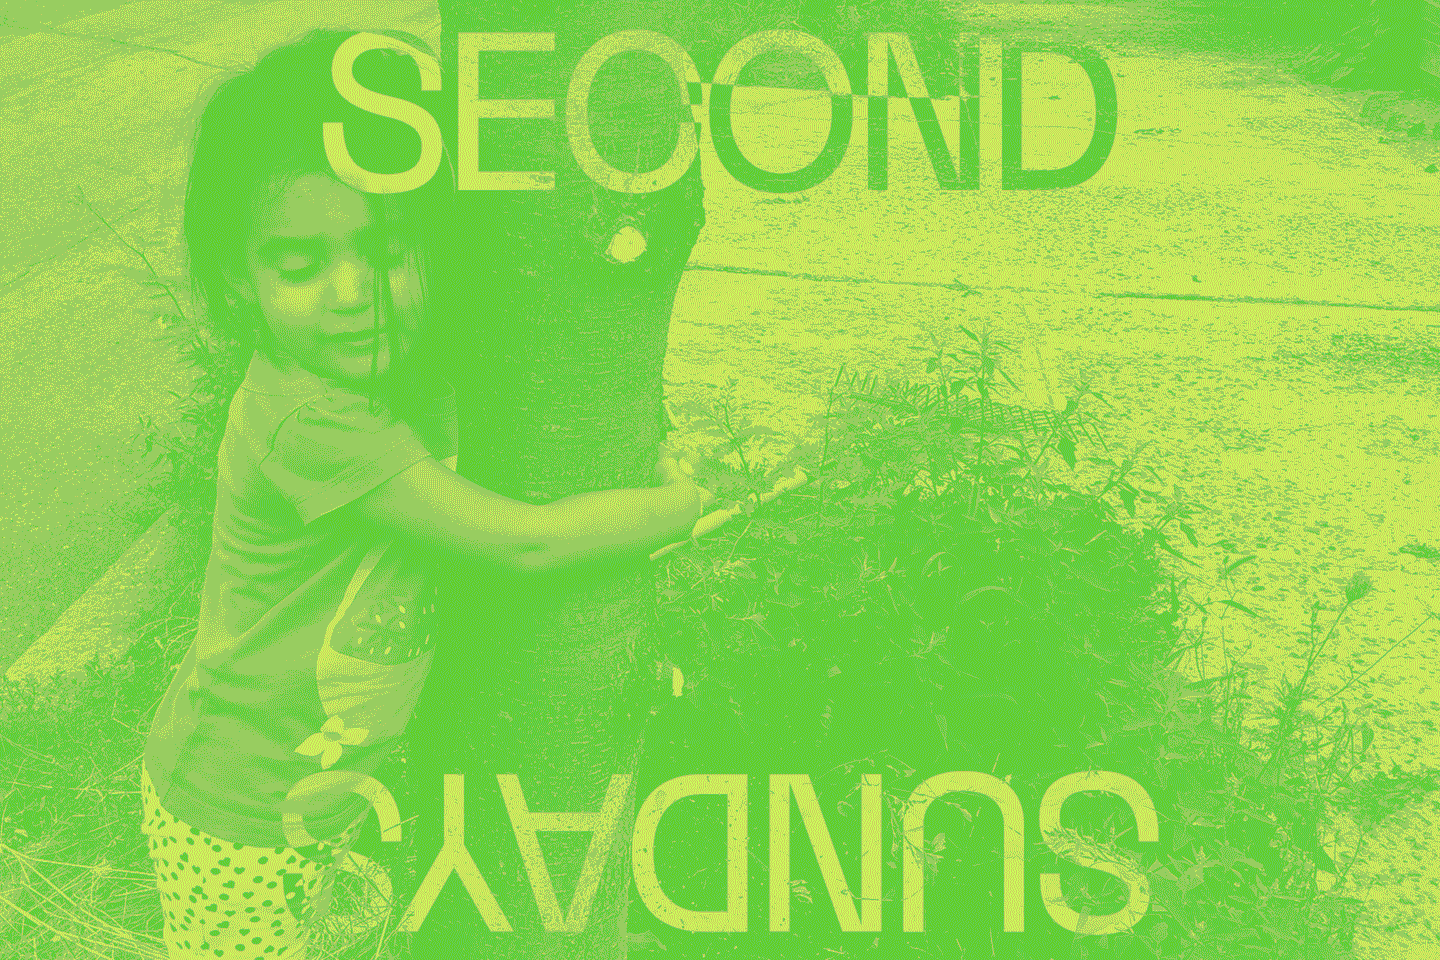 Green gif that reads "Second Sundays" over a collage of images